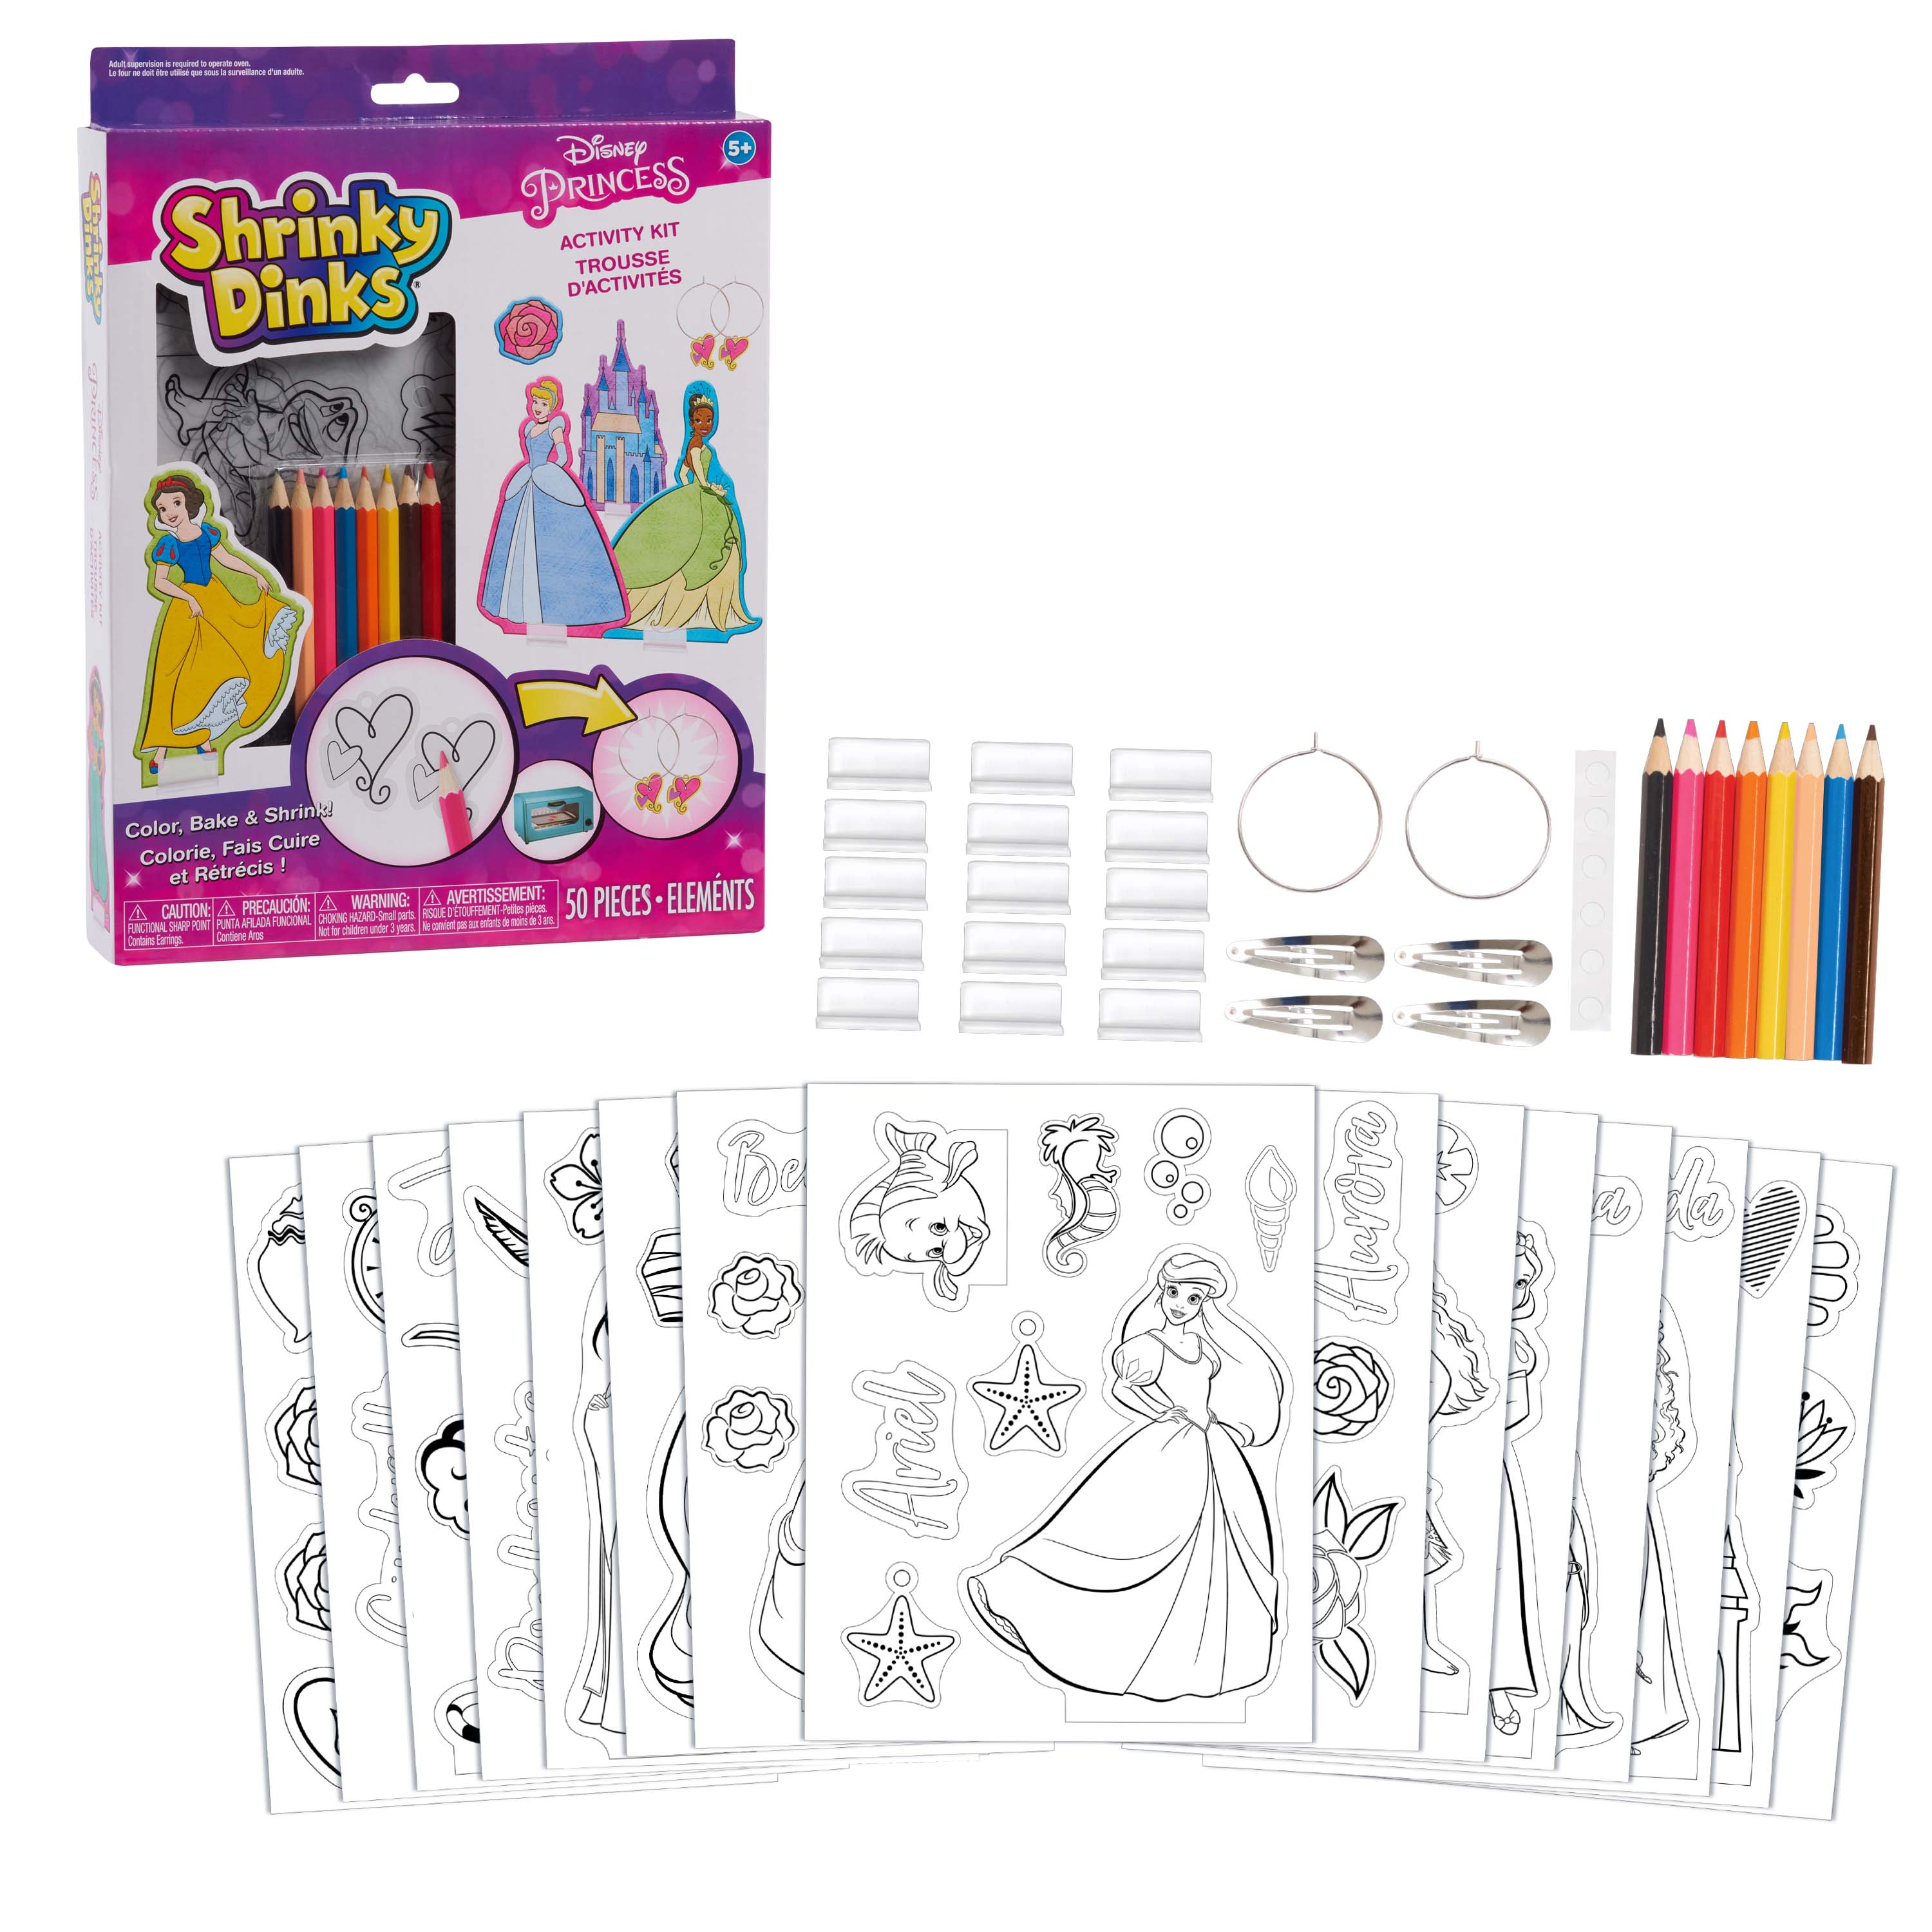 Shrinky Dinks Christmas Tree Kit, Kids Toys for Ages 5 Up by Just Play